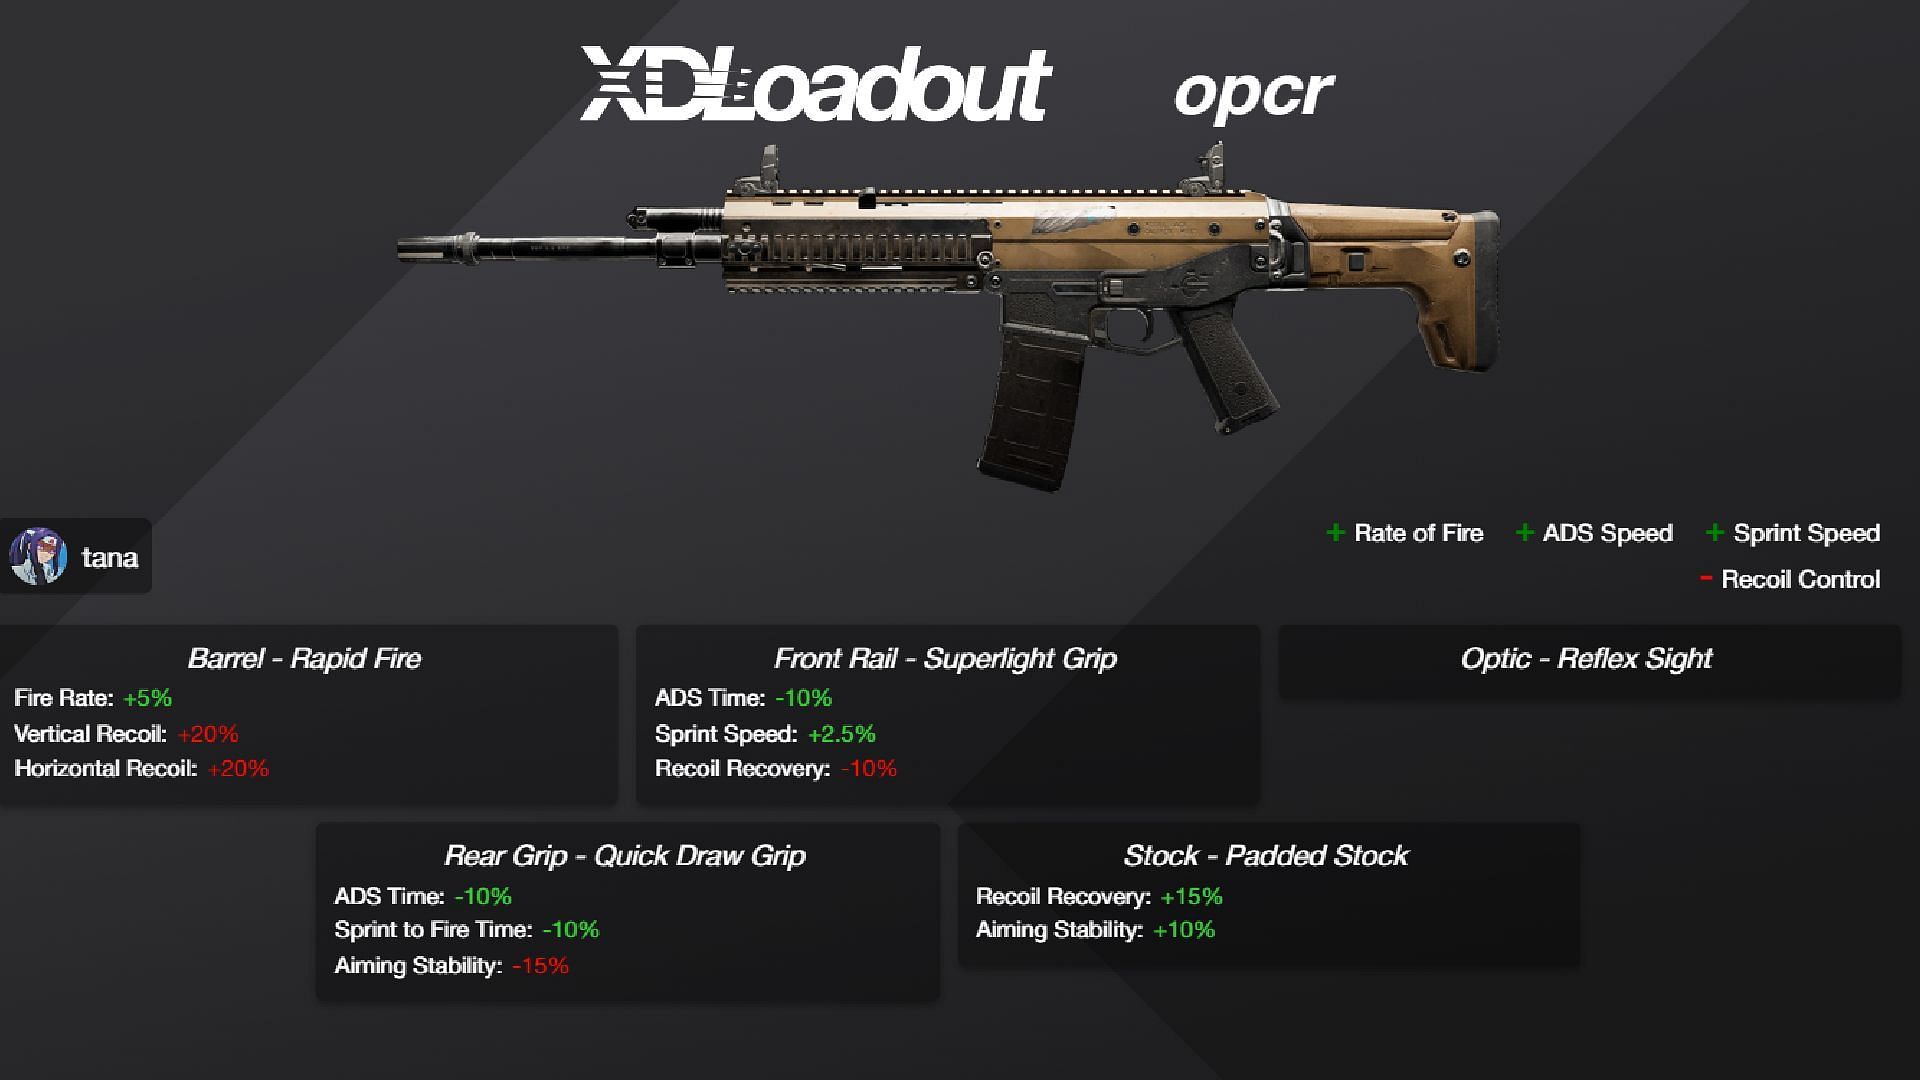 ACR 6.8 is one of the lowest recoil Assault Rifles in XDefiant (Image via Ubisoft)